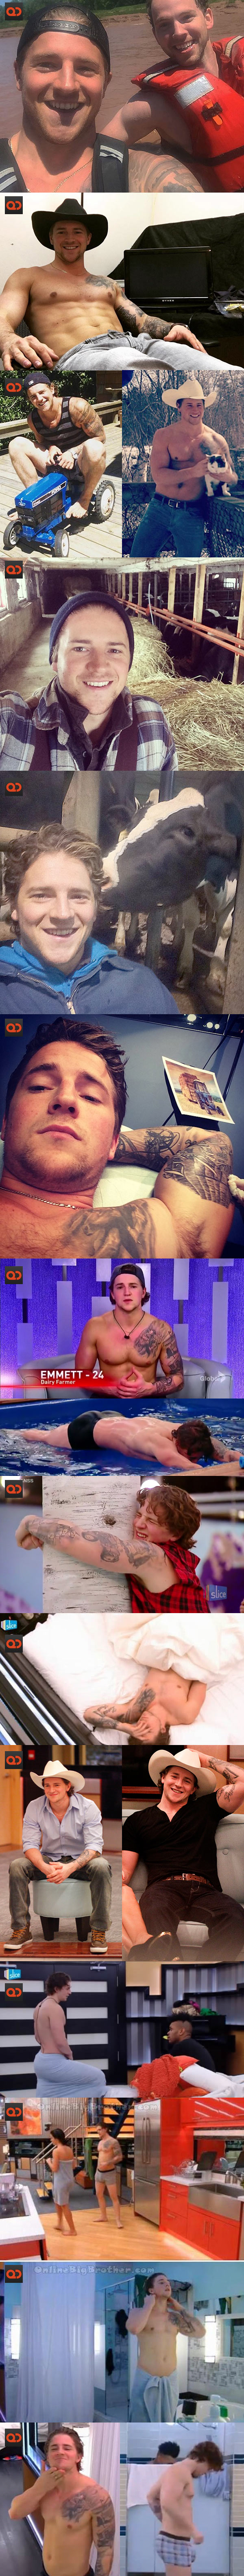 Emmett Blois, Amazing Race And Big Brother Canada Contestant, Cock Exposed!